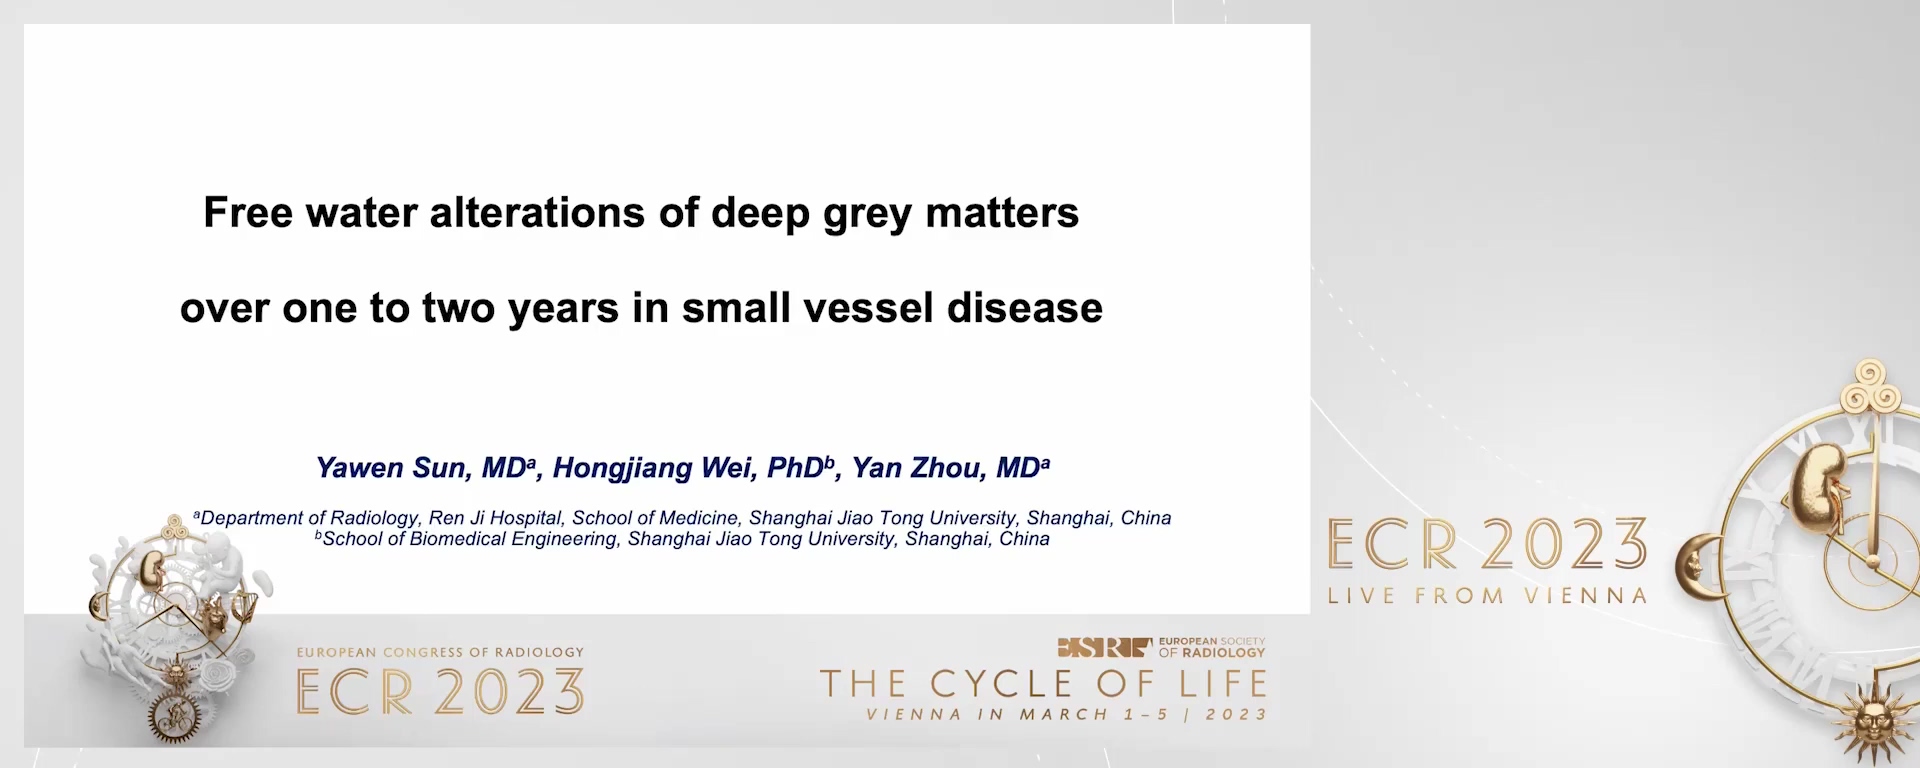 Free water alterations of deep grey matters over one to two years in small vessel disease